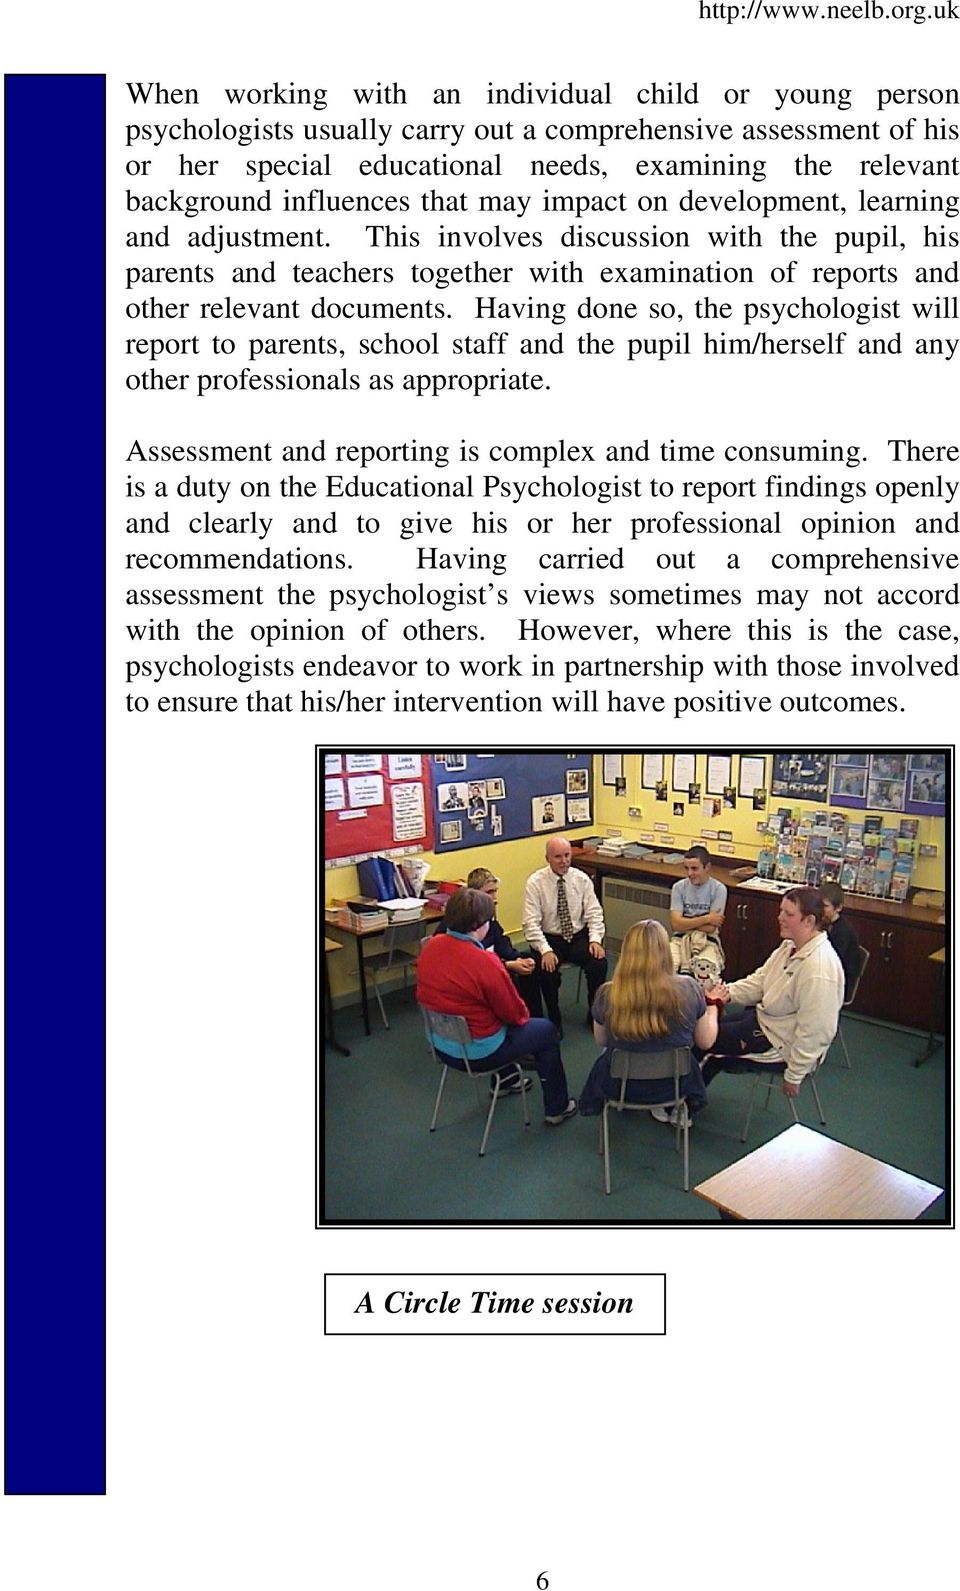 Having done so, the psychologist will report to parents, school staff and the pupil him/herself and any other professionals as appropriate. Assessment and reporting is complex and time consuming.